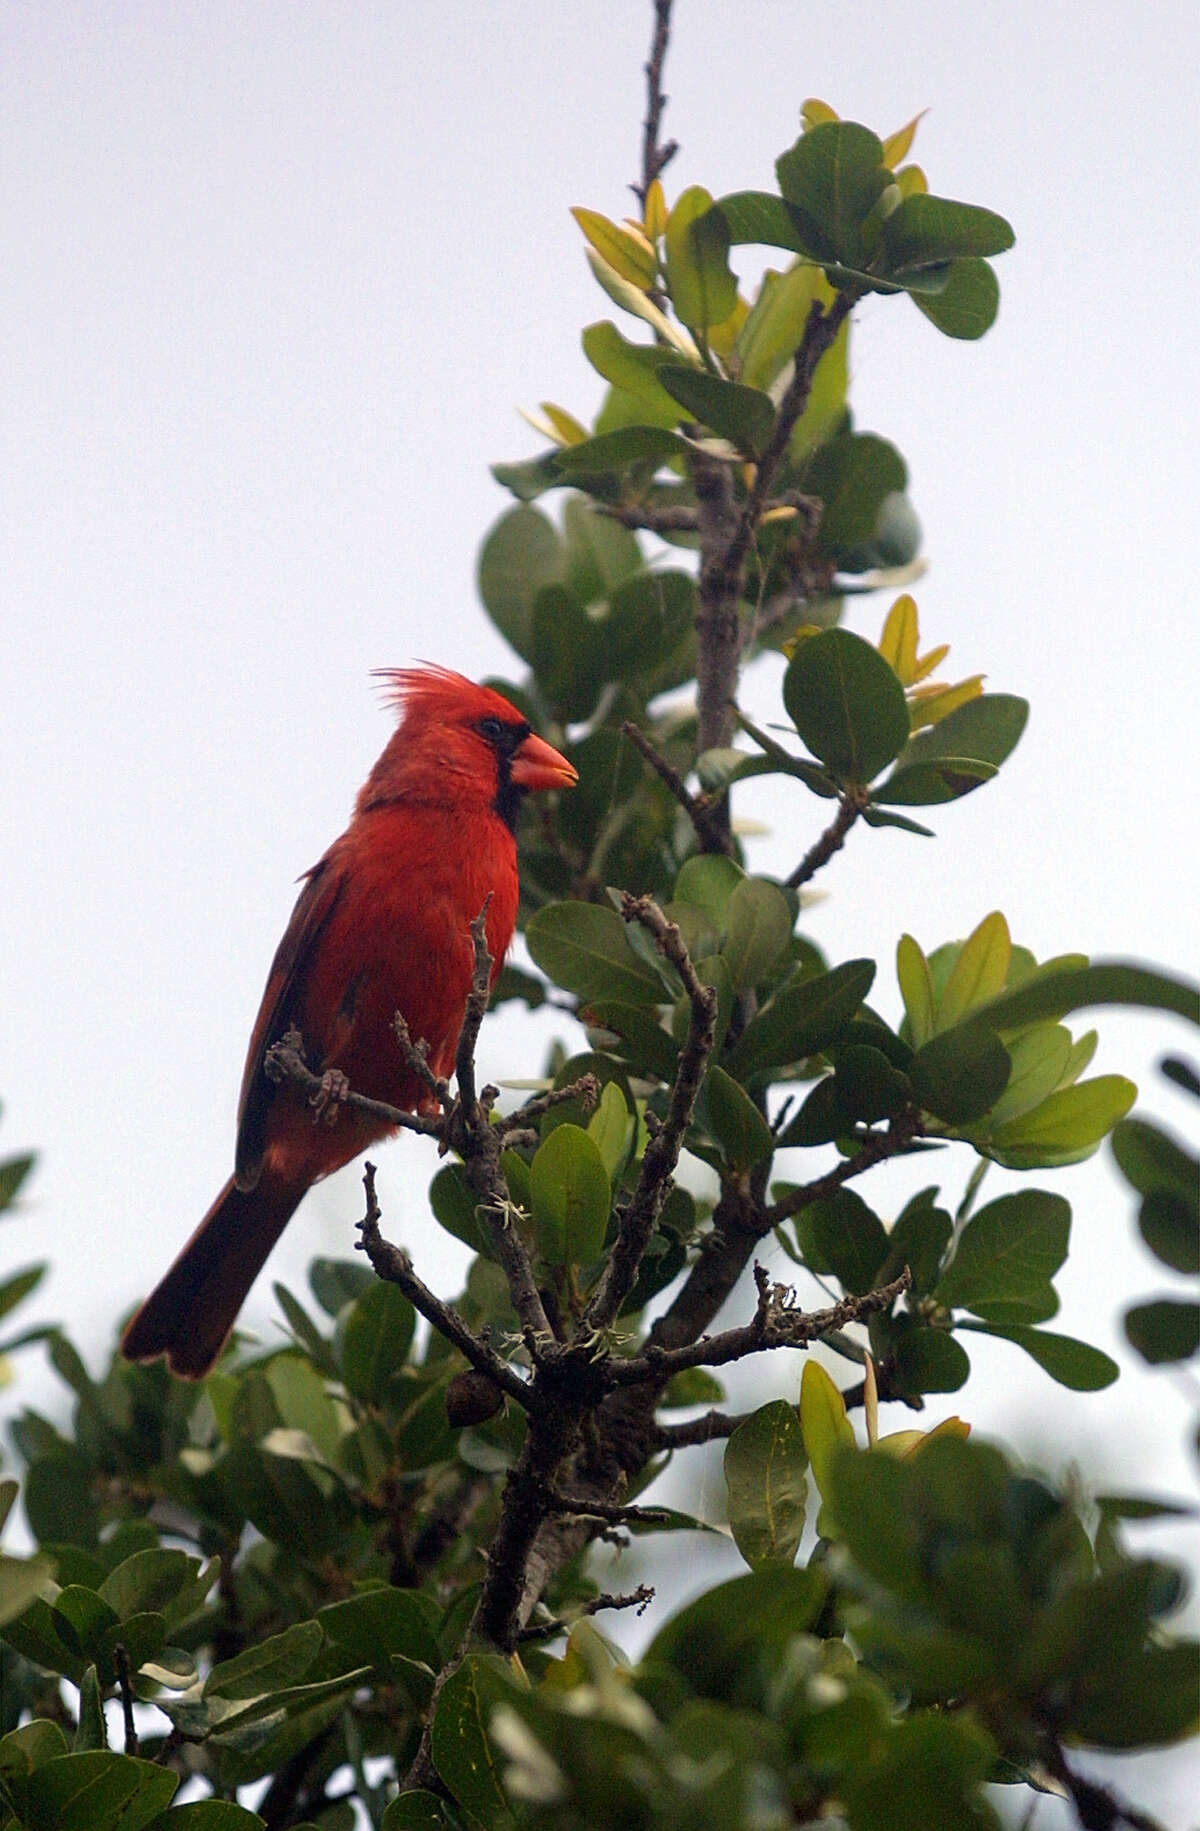 The San Antonio Botanical Gardens, with bird life, and botanical environments ranging from the new xeriscape cottages to the rainforest environment of the conservatorium, offers visitors a colorful and calm break from the bustle of the city. Here we see a male cardinal. ( PHOTO BY J. MICHAEL SHORT / SPECIAL )